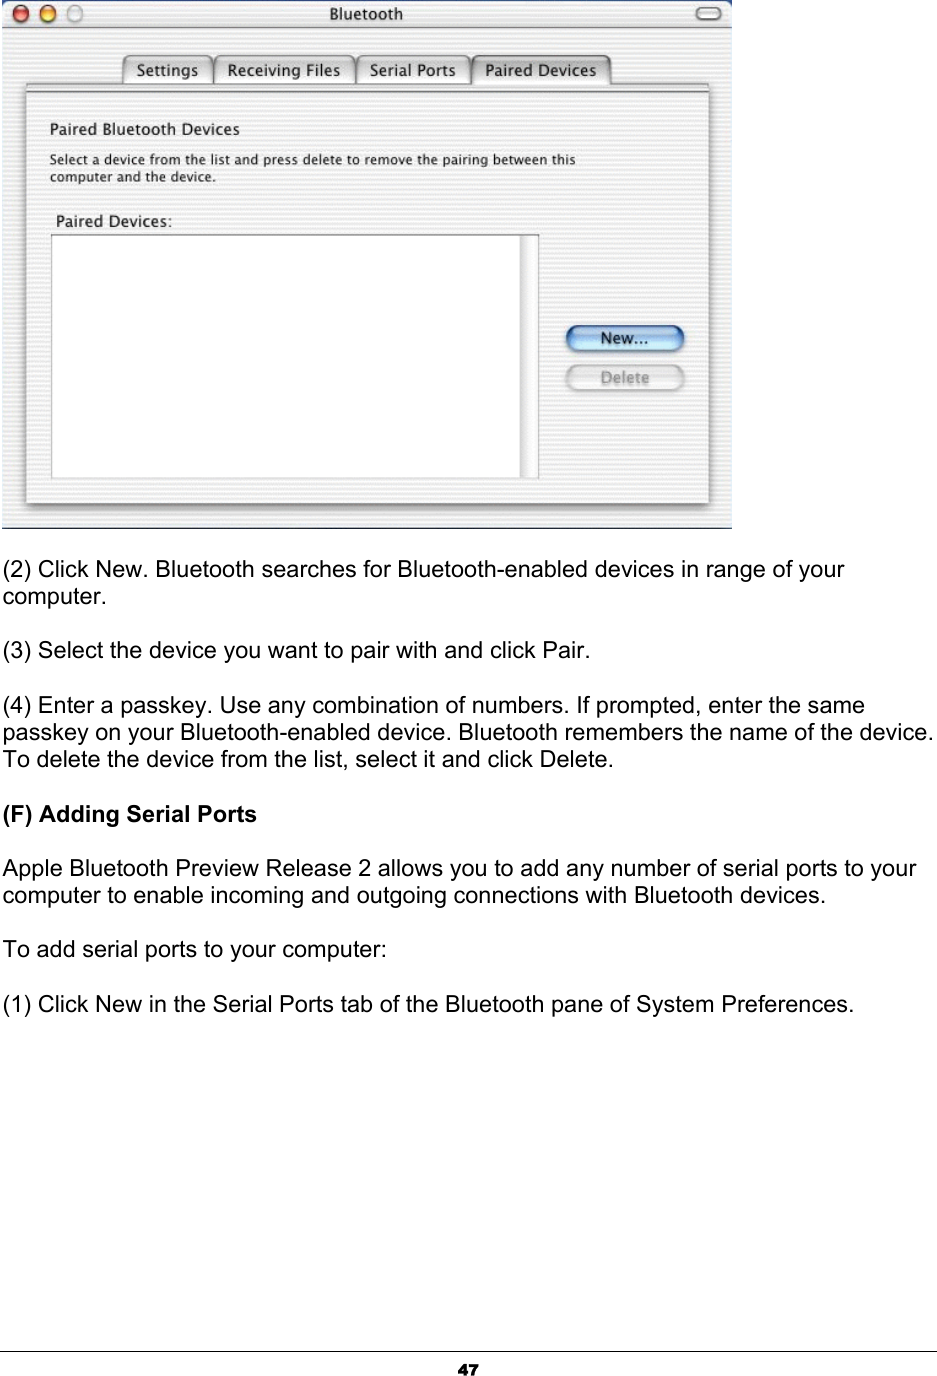  47 (2) Click New. Bluetooth searches for Bluetooth-enabled devices in range of your computer.  (3) Select the device you want to pair with and click Pair.   (4) Enter a passkey. Use any combination of numbers. If prompted, enter the same passkey on your Bluetooth-enabled device. Bluetooth remembers the name of the device. To delete the device from the list, select it and click Delete.   (F) Adding Serial Ports   Apple Bluetooth Preview Release 2 allows you to add any number of serial ports to your computer to enable incoming and outgoing connections with Bluetooth devices.   To add serial ports to your computer:   (1) Click New in the Serial Ports tab of the Bluetooth pane of System Preferences. 